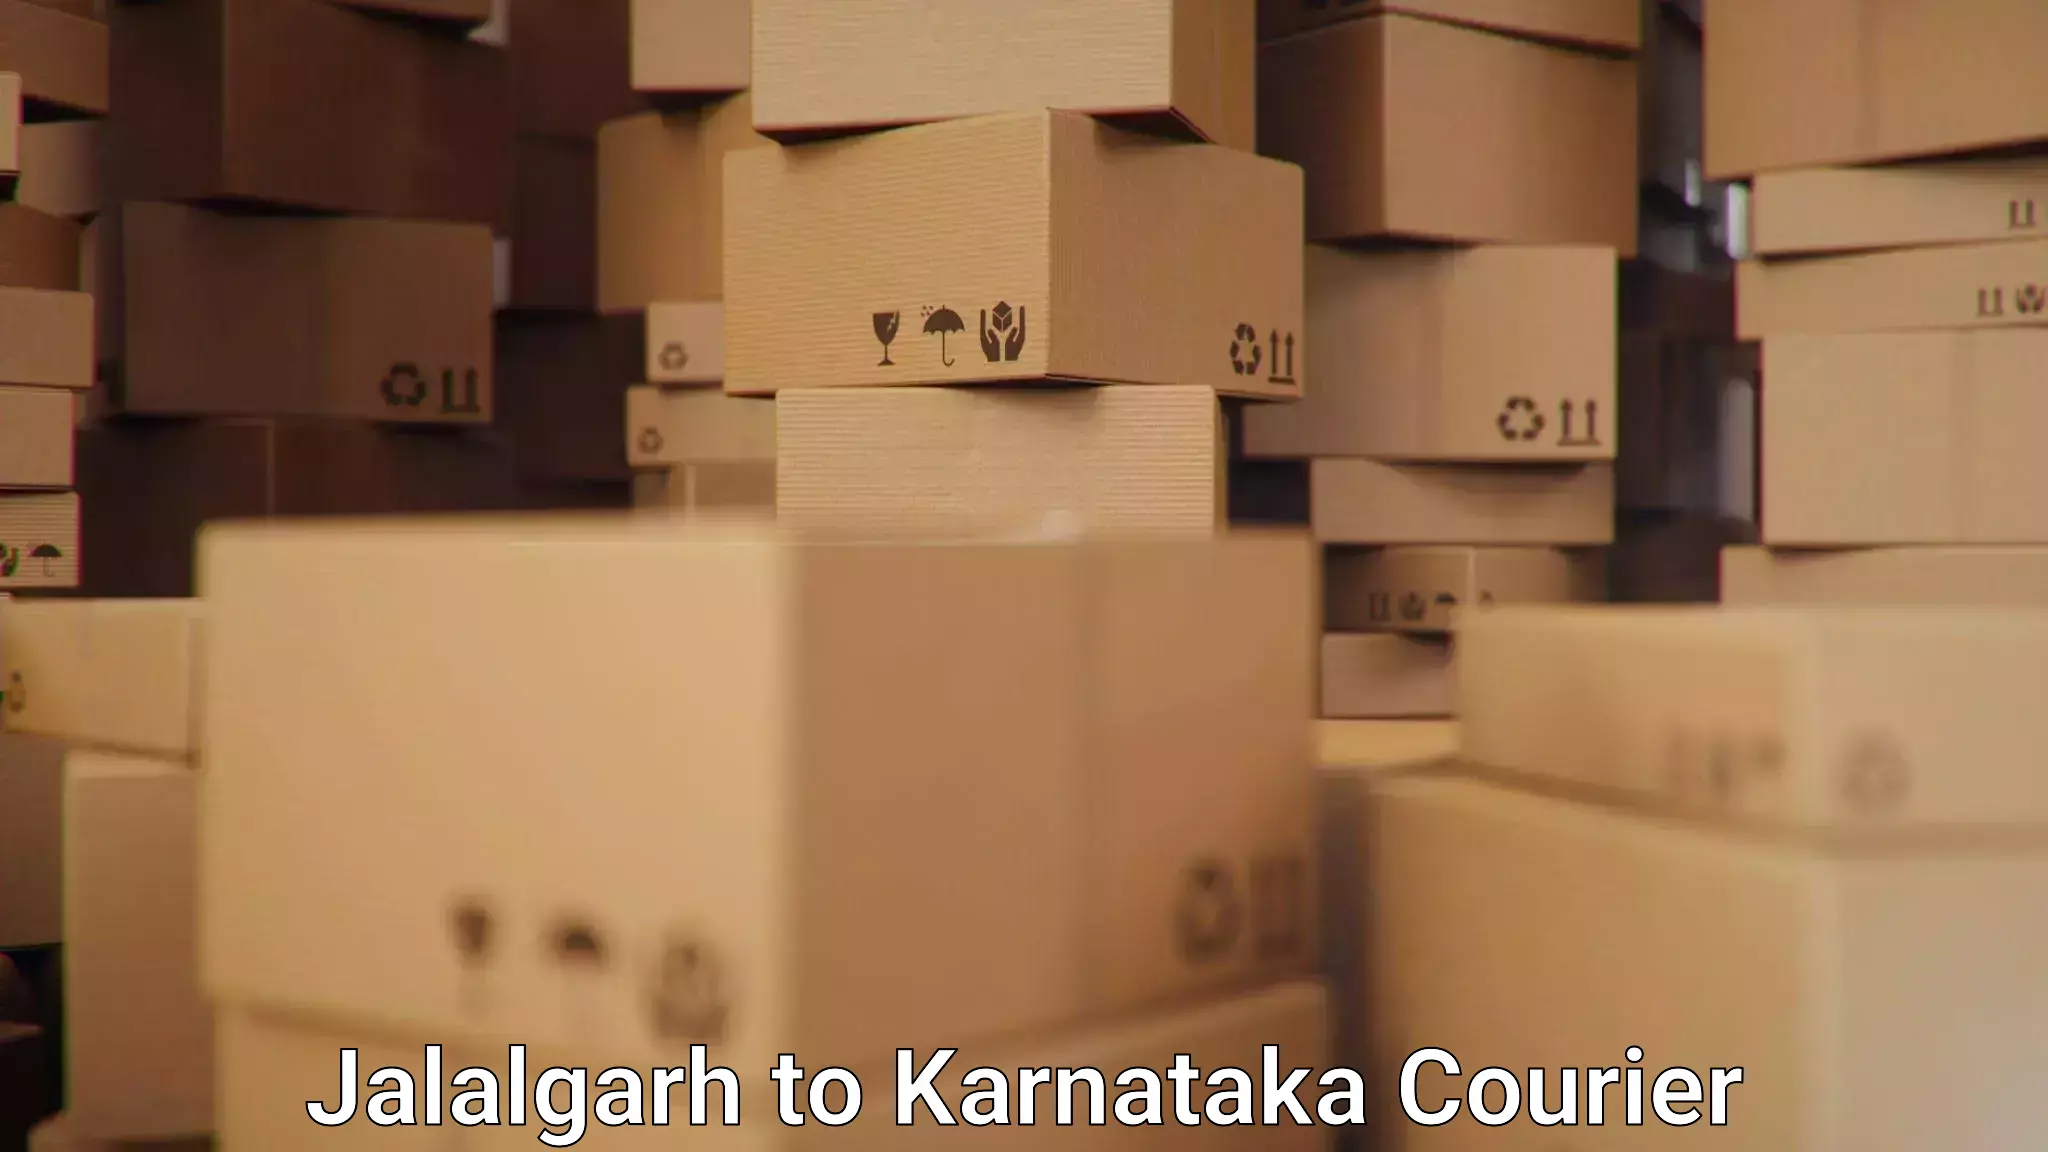 End-to-end delivery in Jalalgarh to Karnataka